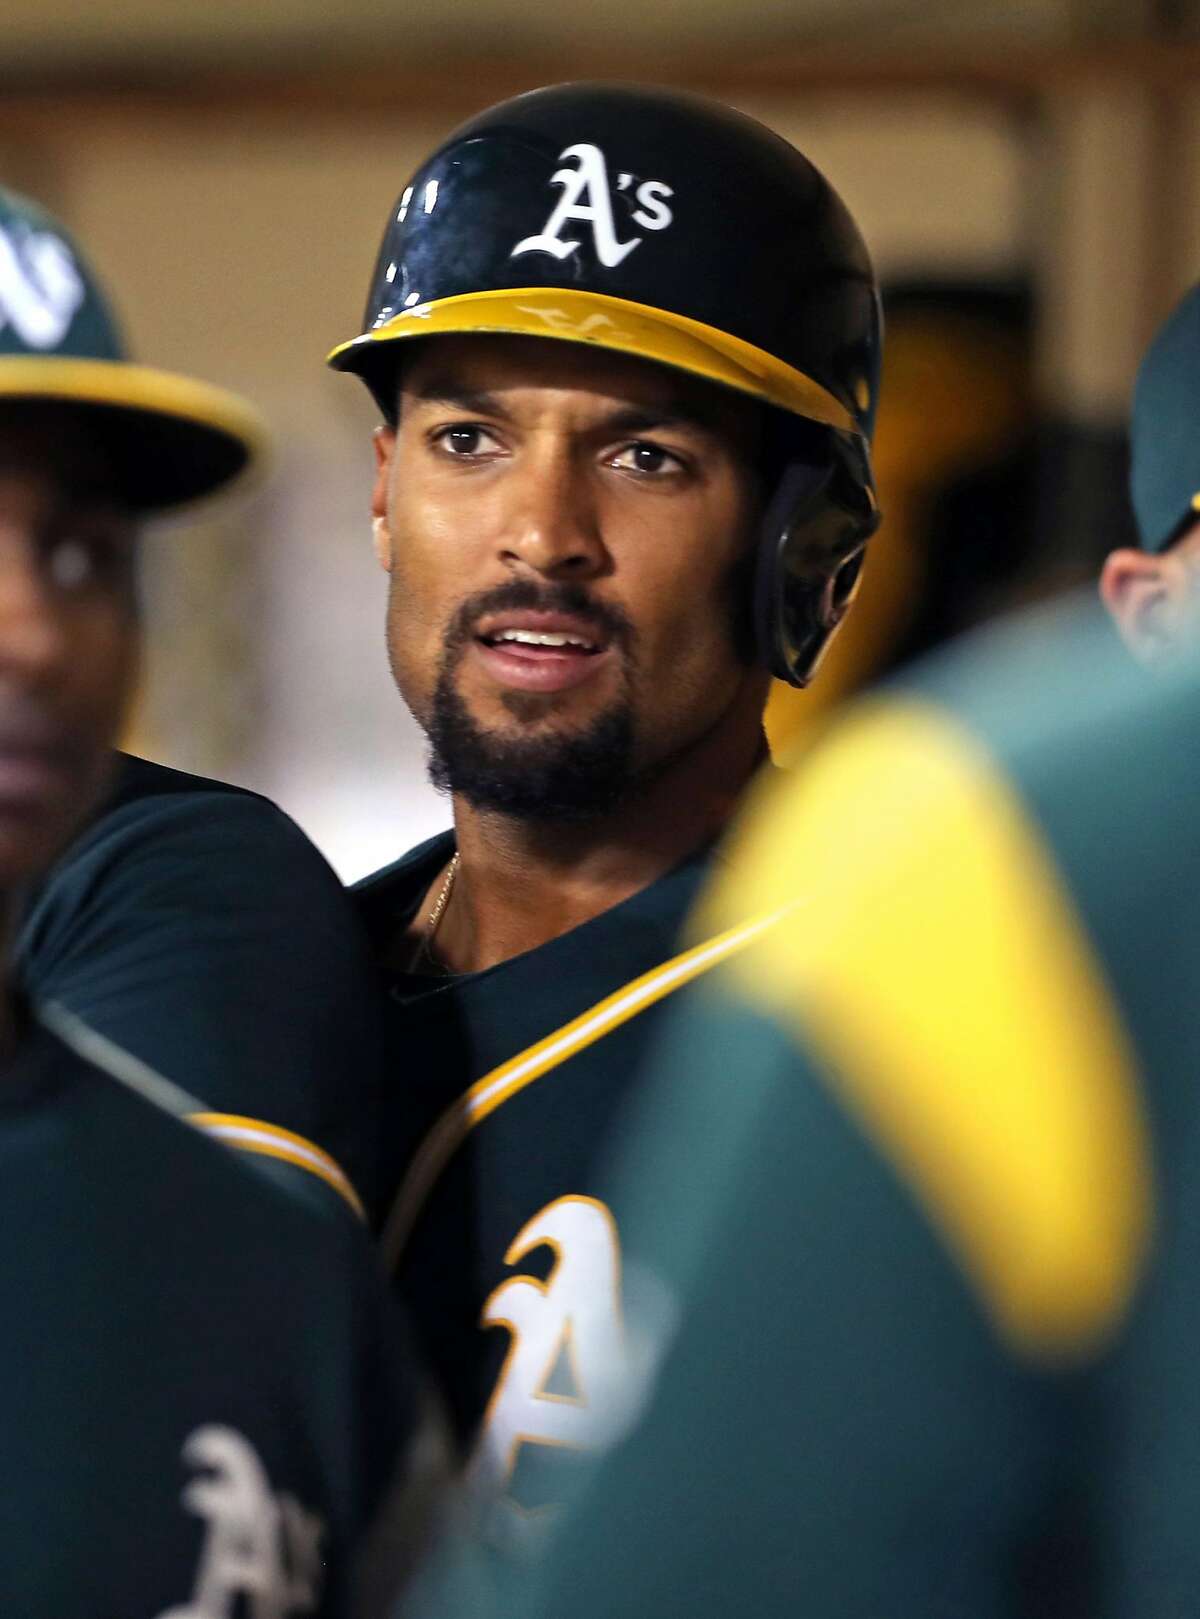 Oakland Athletics' Marcus Semien after his 6th inning grand slam against San Francisco Giants during MLB game at Oakland Coliseum in Oakland, Calif. on Monday, July 31, 2017.